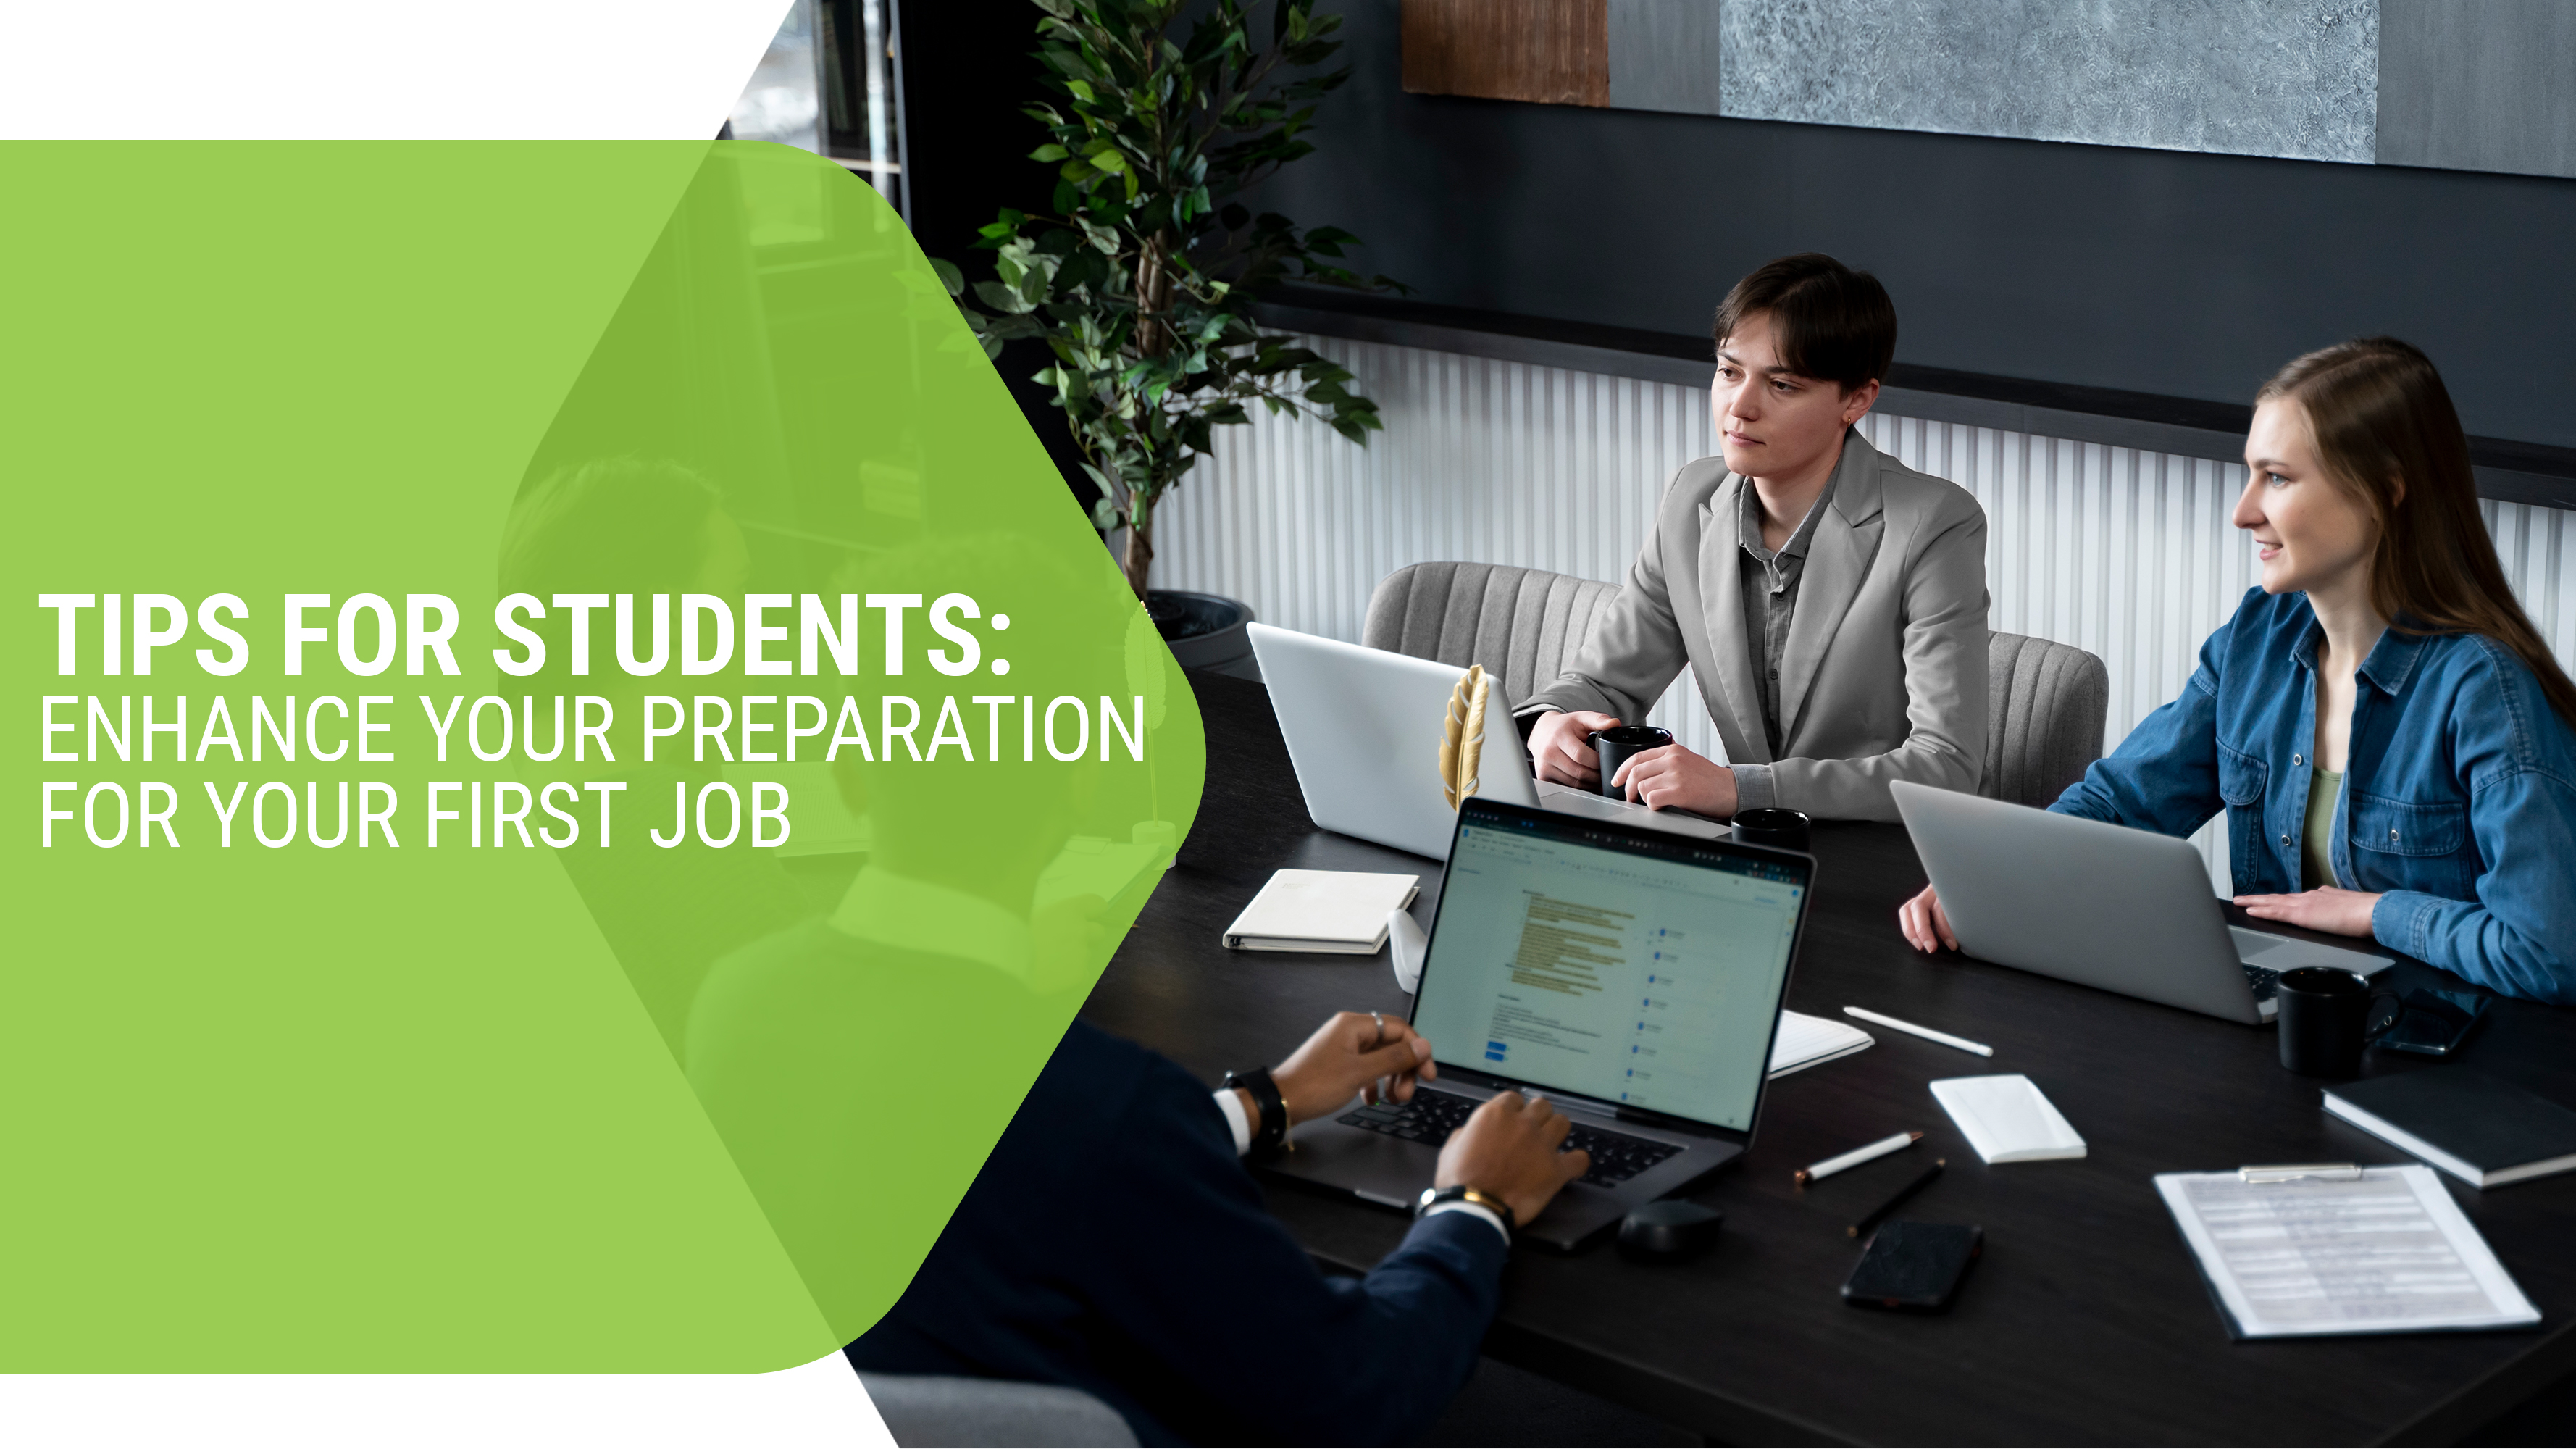 Tips for Students: Enhance Your Preparation for Your First Job